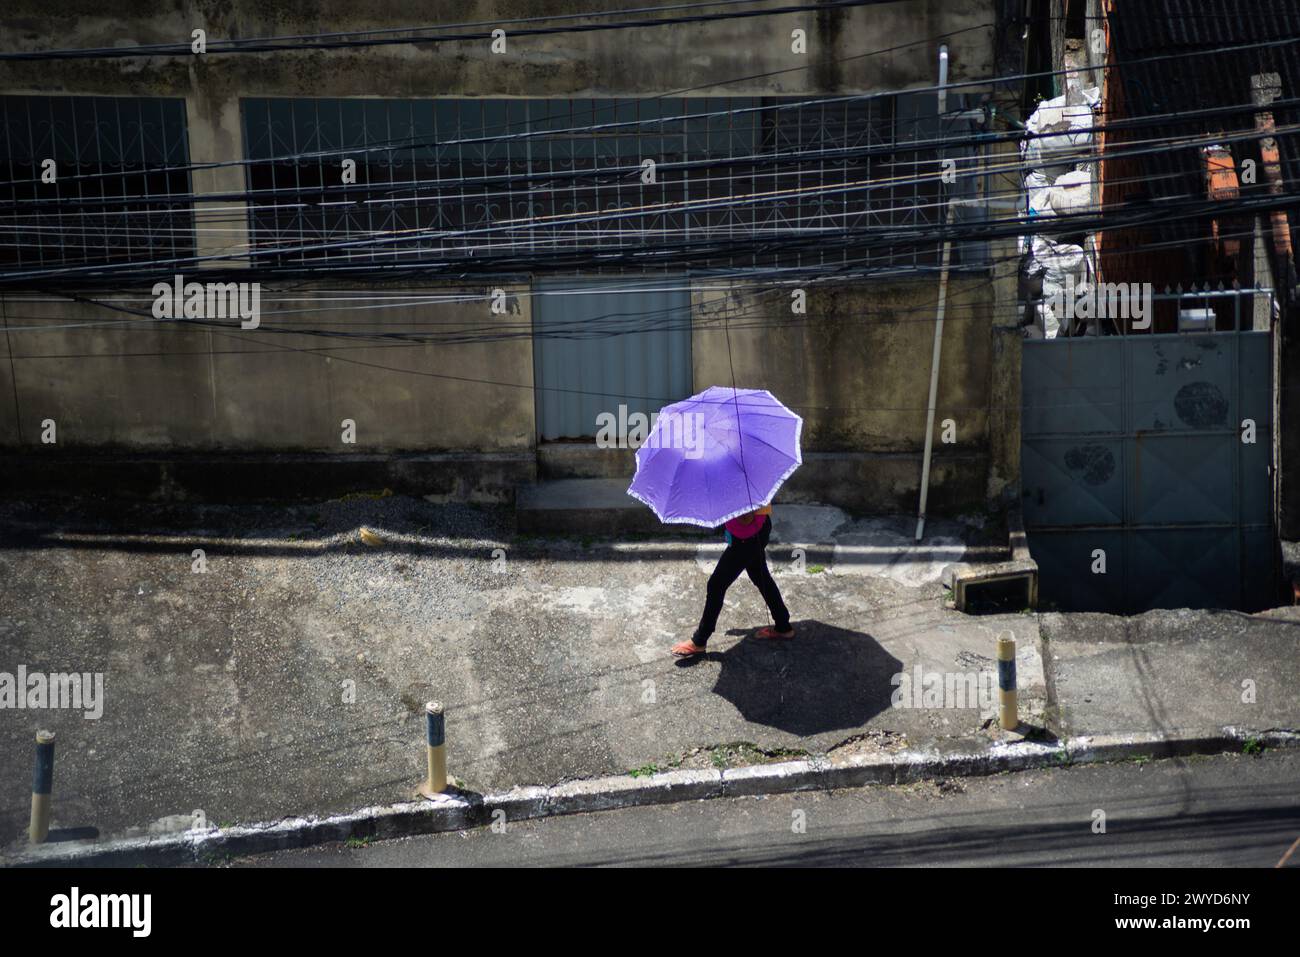 Salvador, Bahia, Brazil - January 28, 2022: A pedestrian is seen walking down the street with an umbrella to protect himself from the strong sun in th Stock Photo